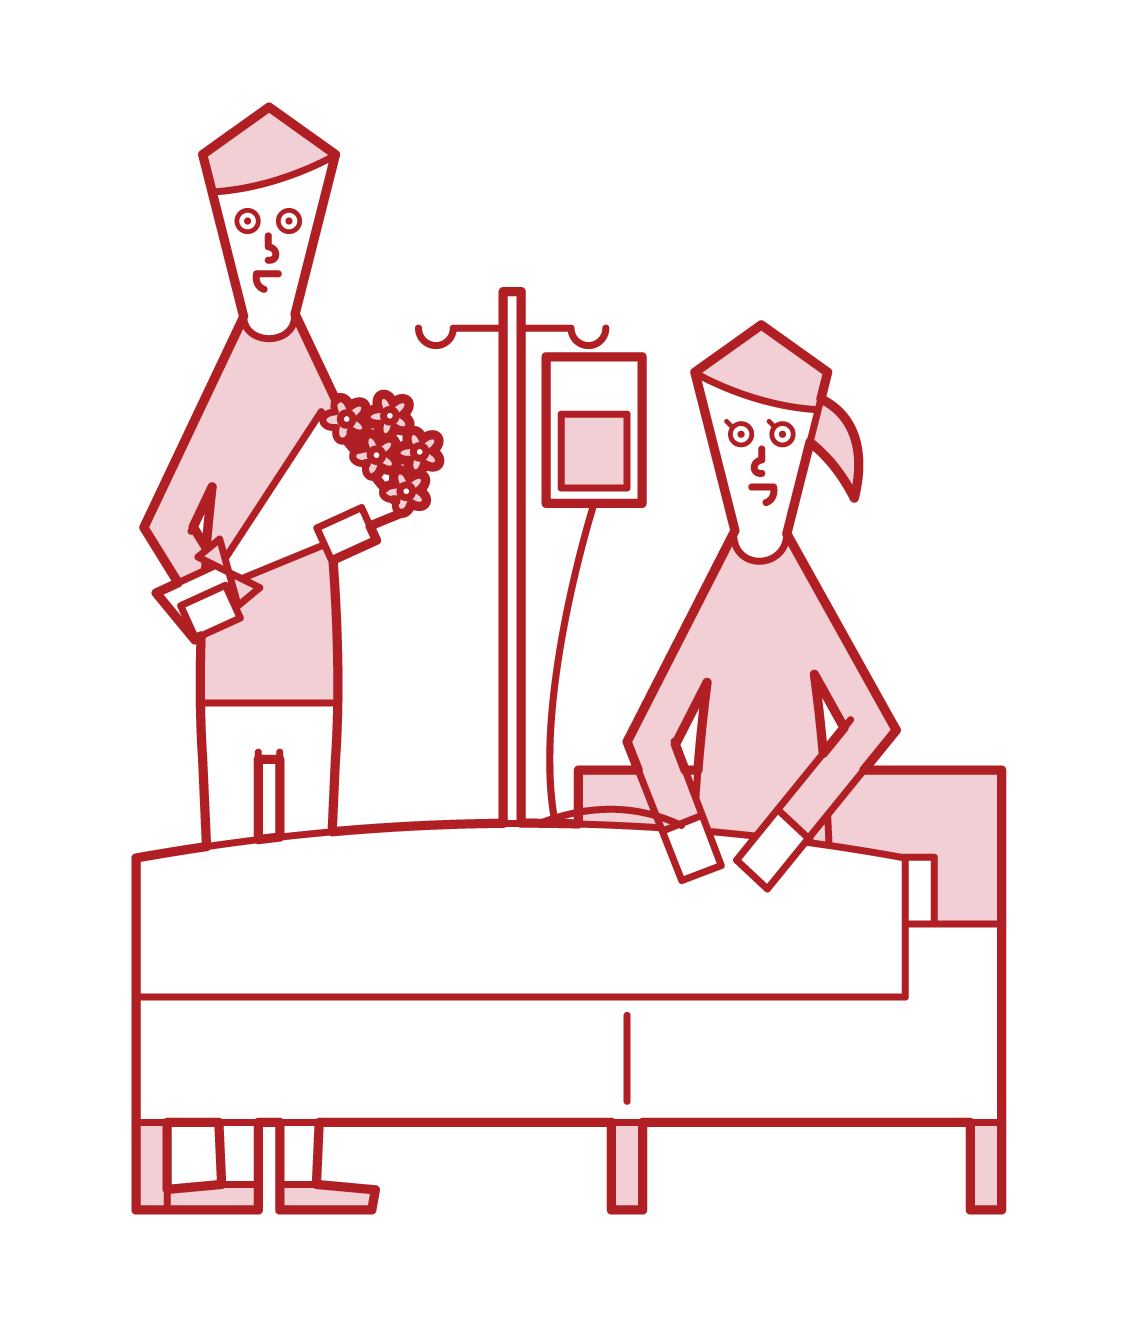 Illustration of a man visiting a hospitalized woman